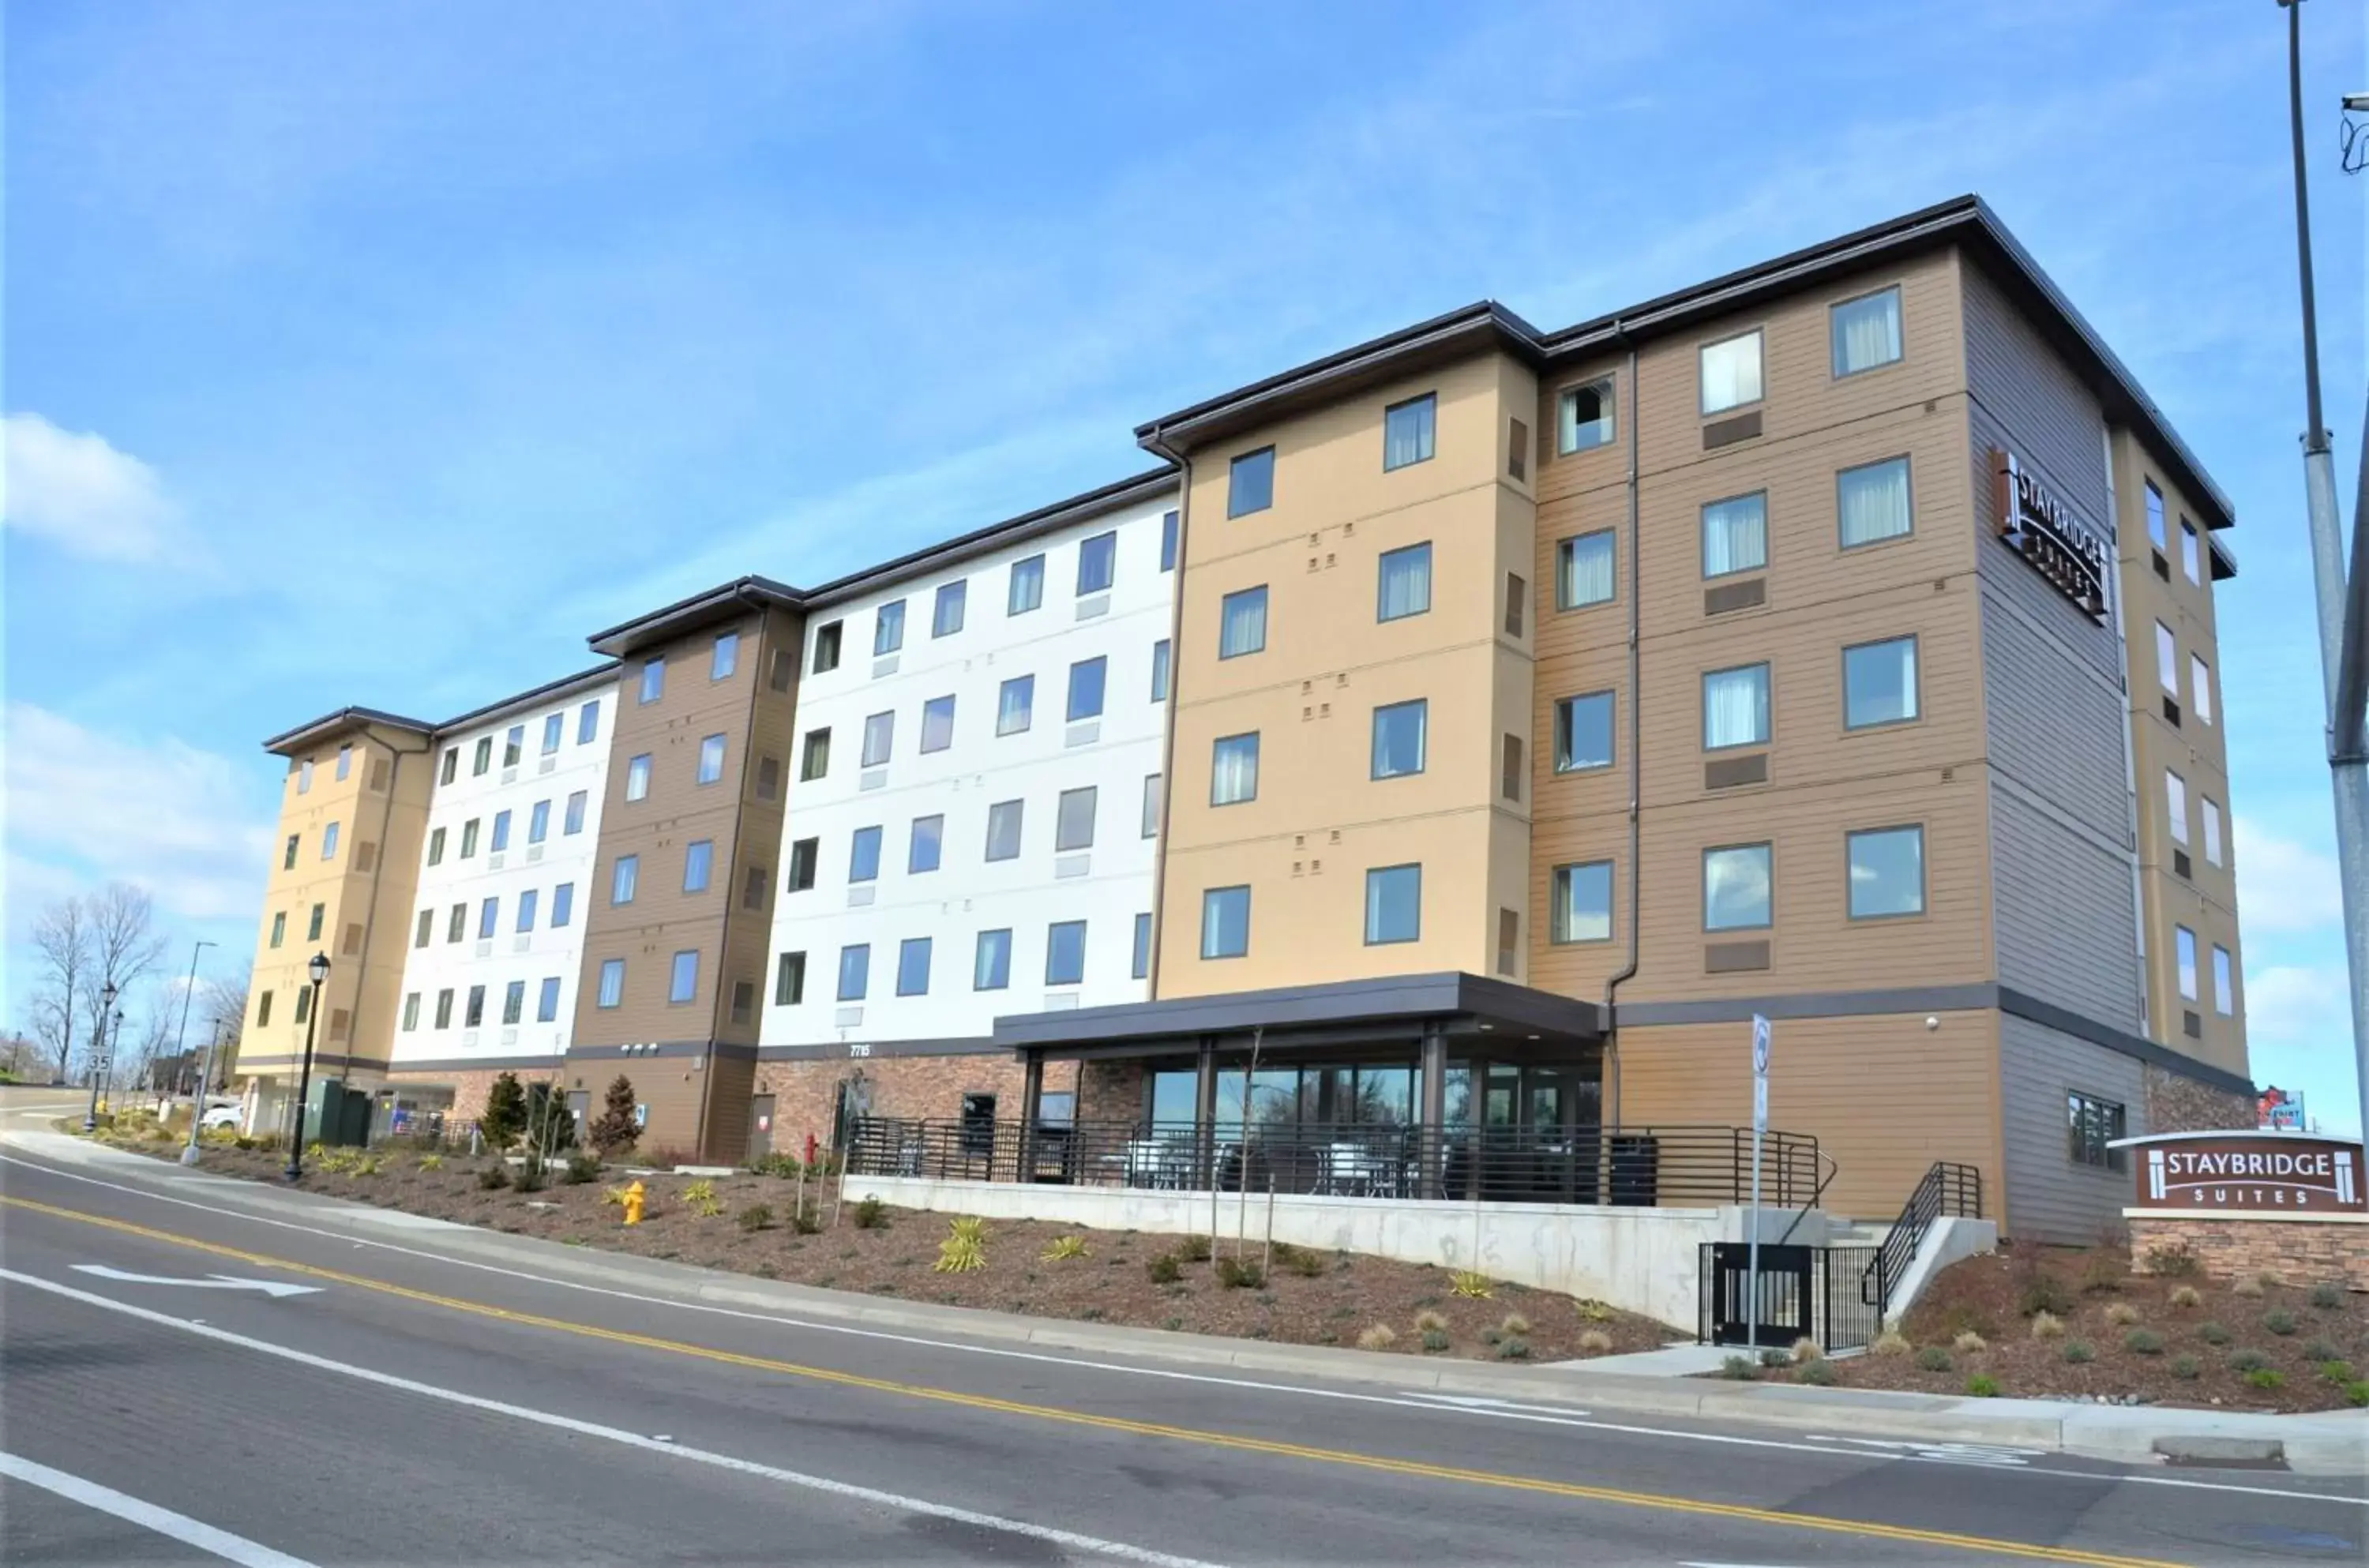 Property Building in Staybridge Suites - Orenco Station, an IHG Hotel